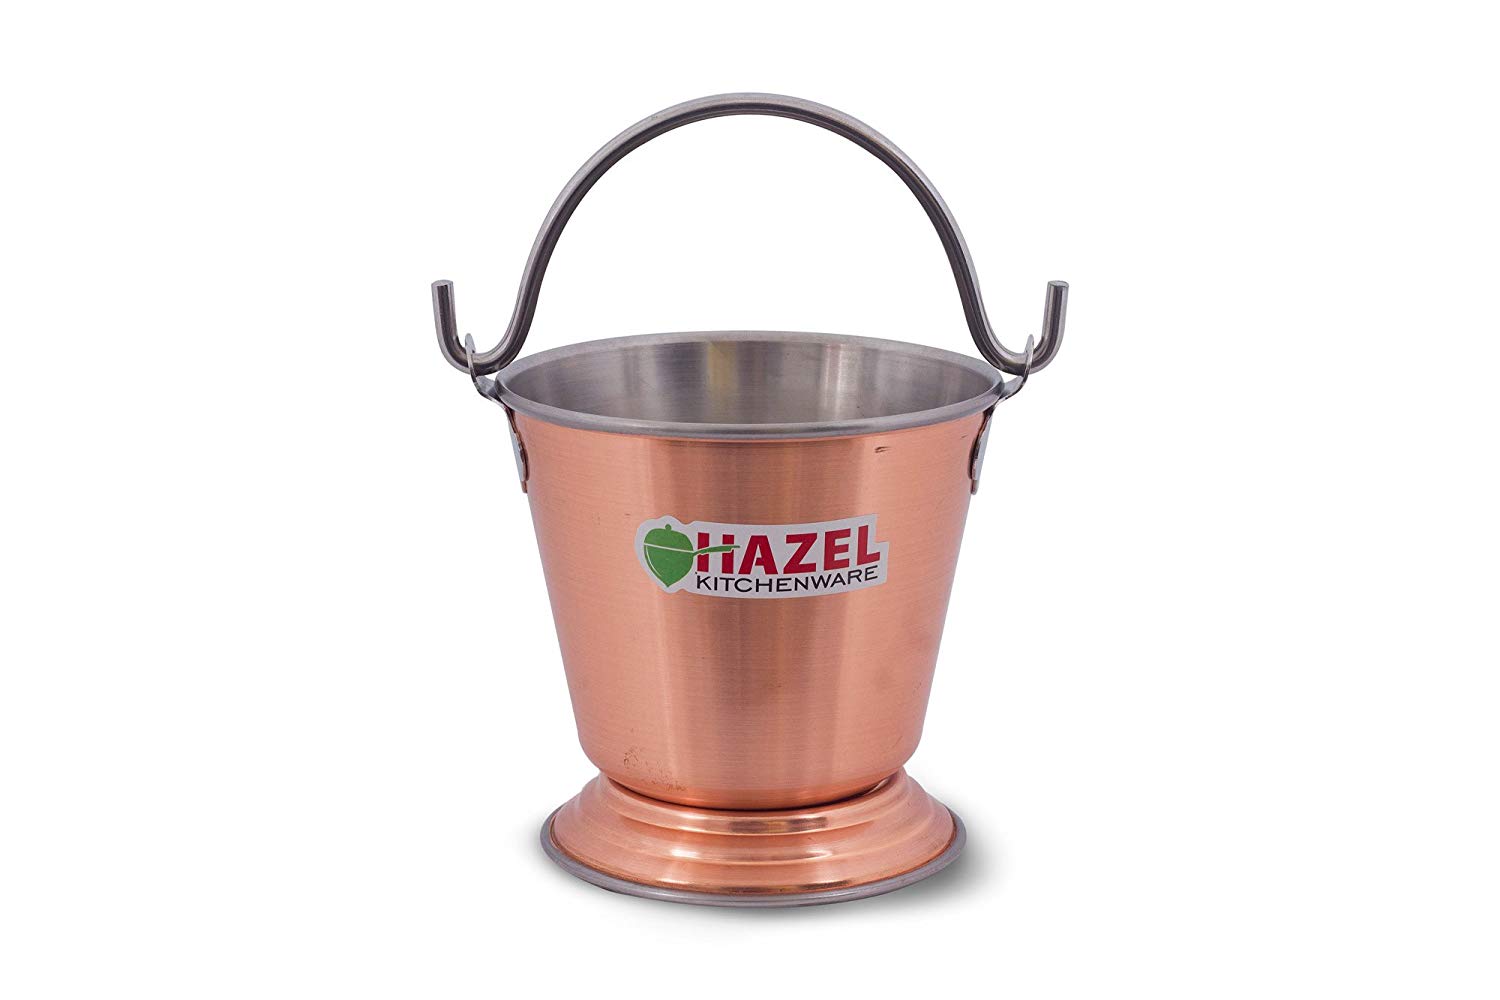 HAZEL Food Curry Dal Serving Stainless Steel Bucket (600 ml), Silver & Copper